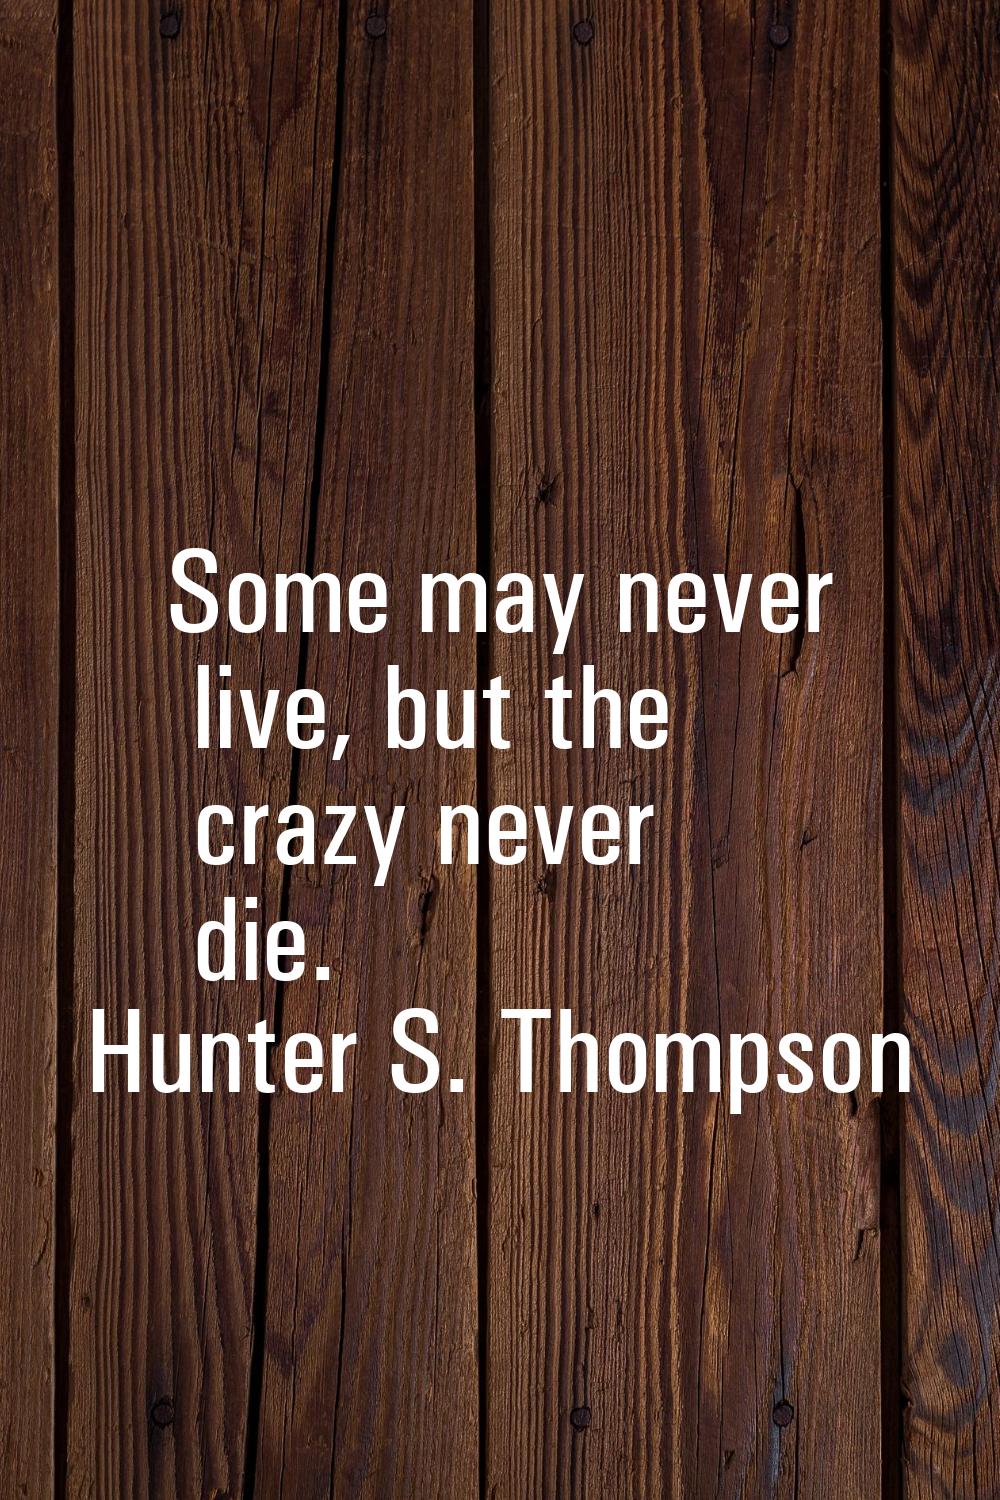 Some may never live, but the crazy never die.